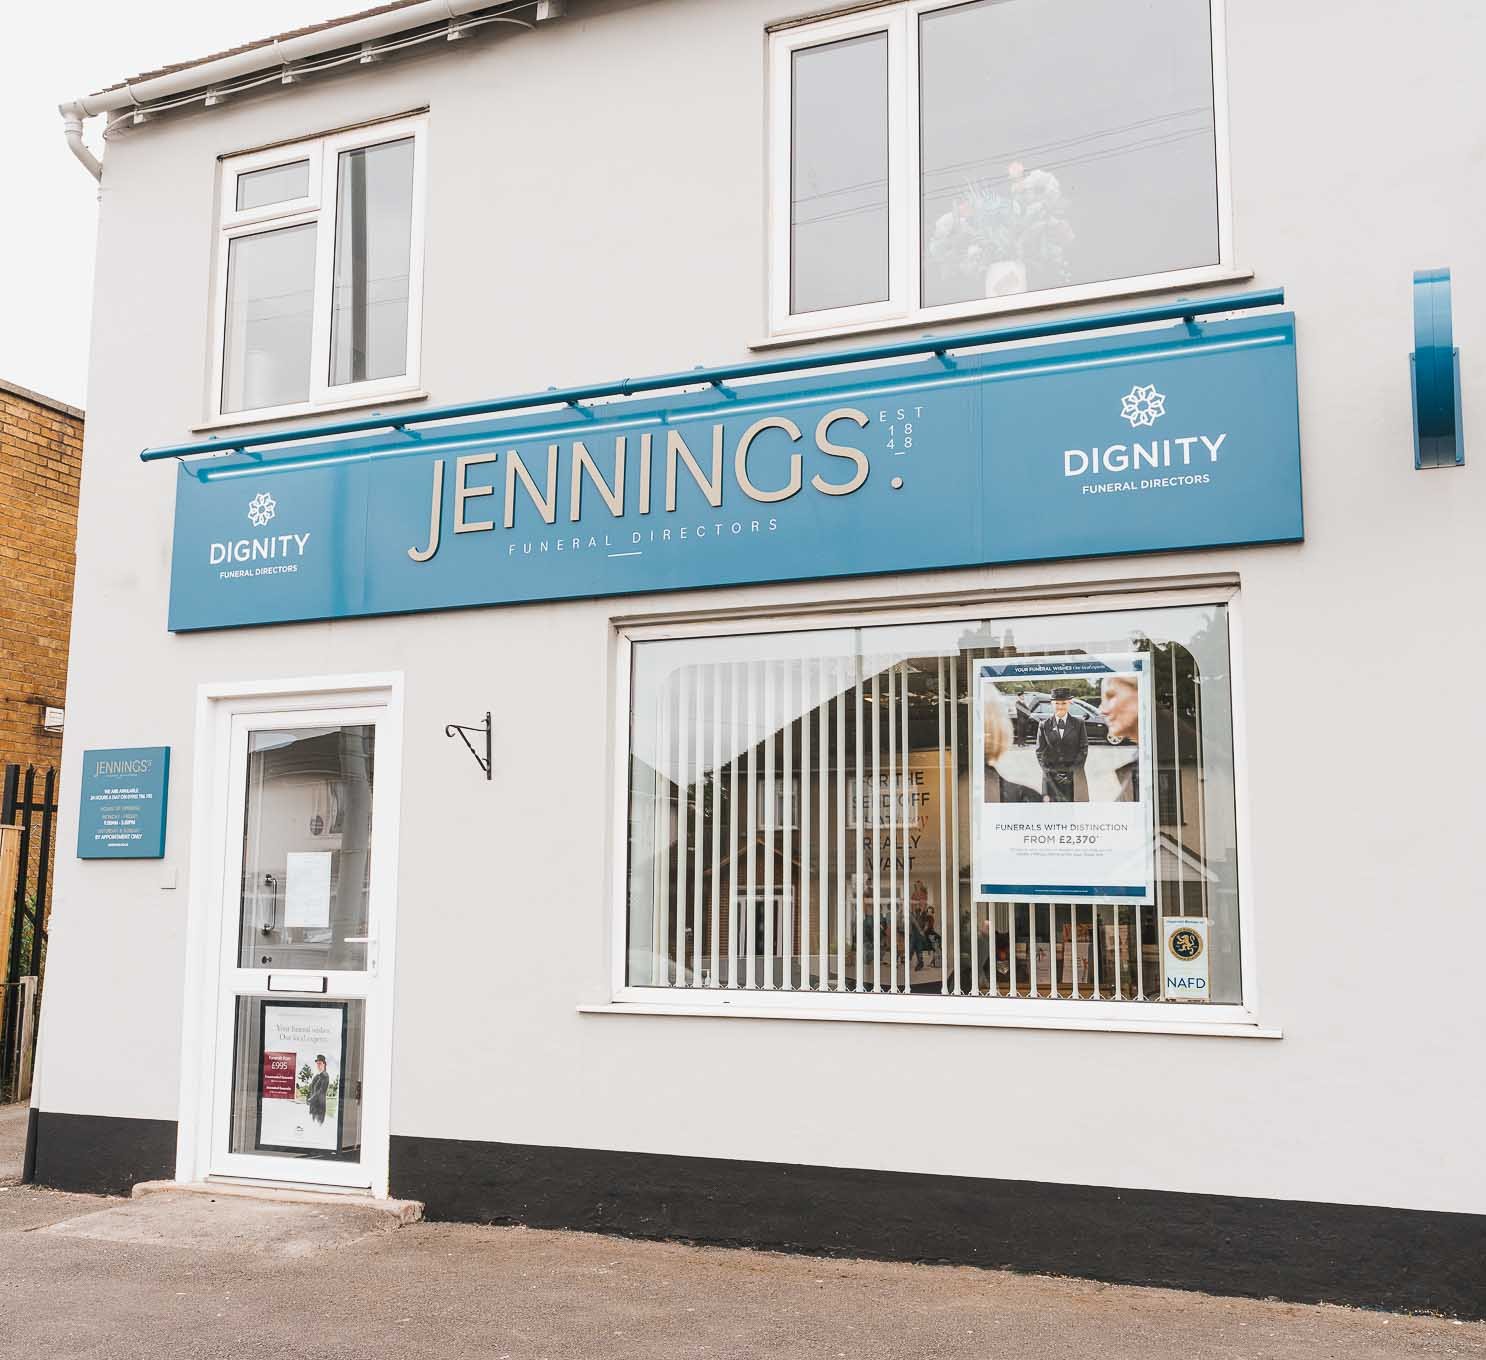 Jennings funeral directors on the Stafford Road in Oxley Wolverhampton